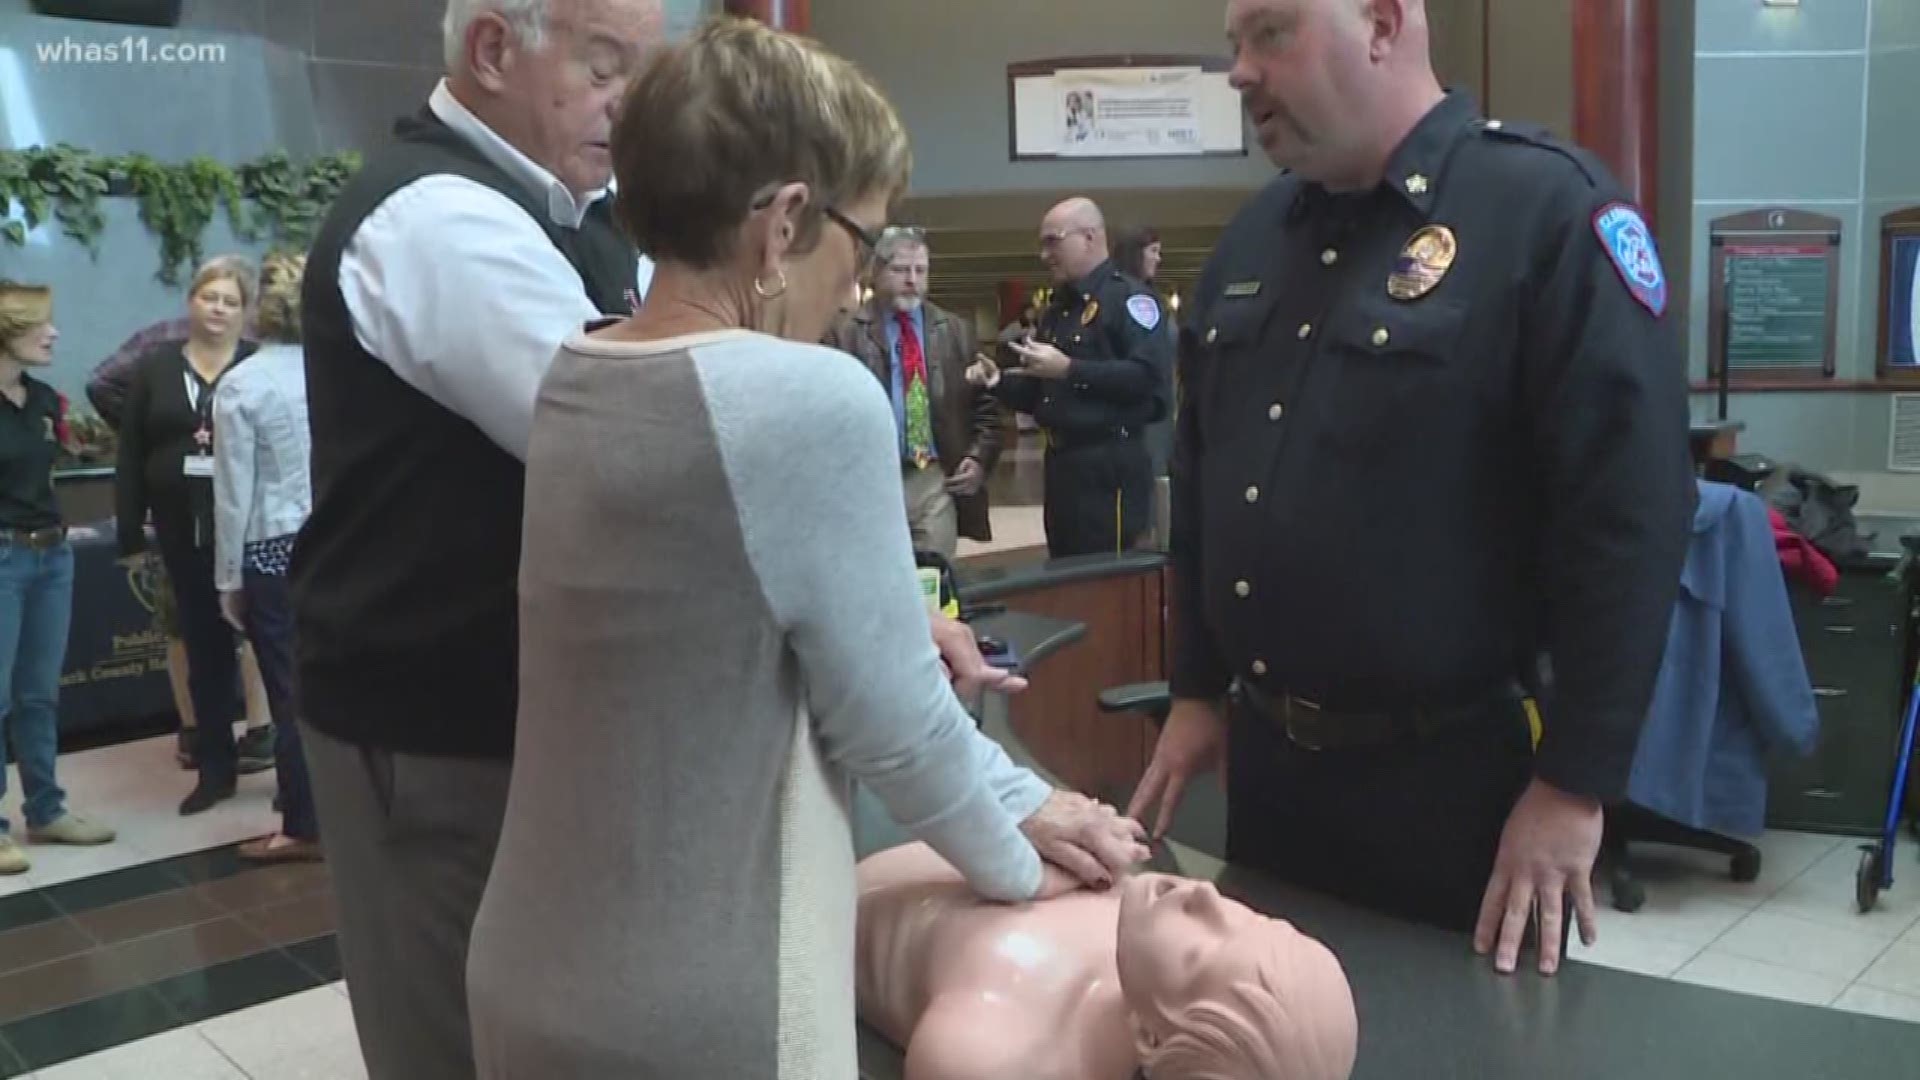 A new program launched in Clark County can deploy those who are trained in CPR to cardiac arrests in their area.